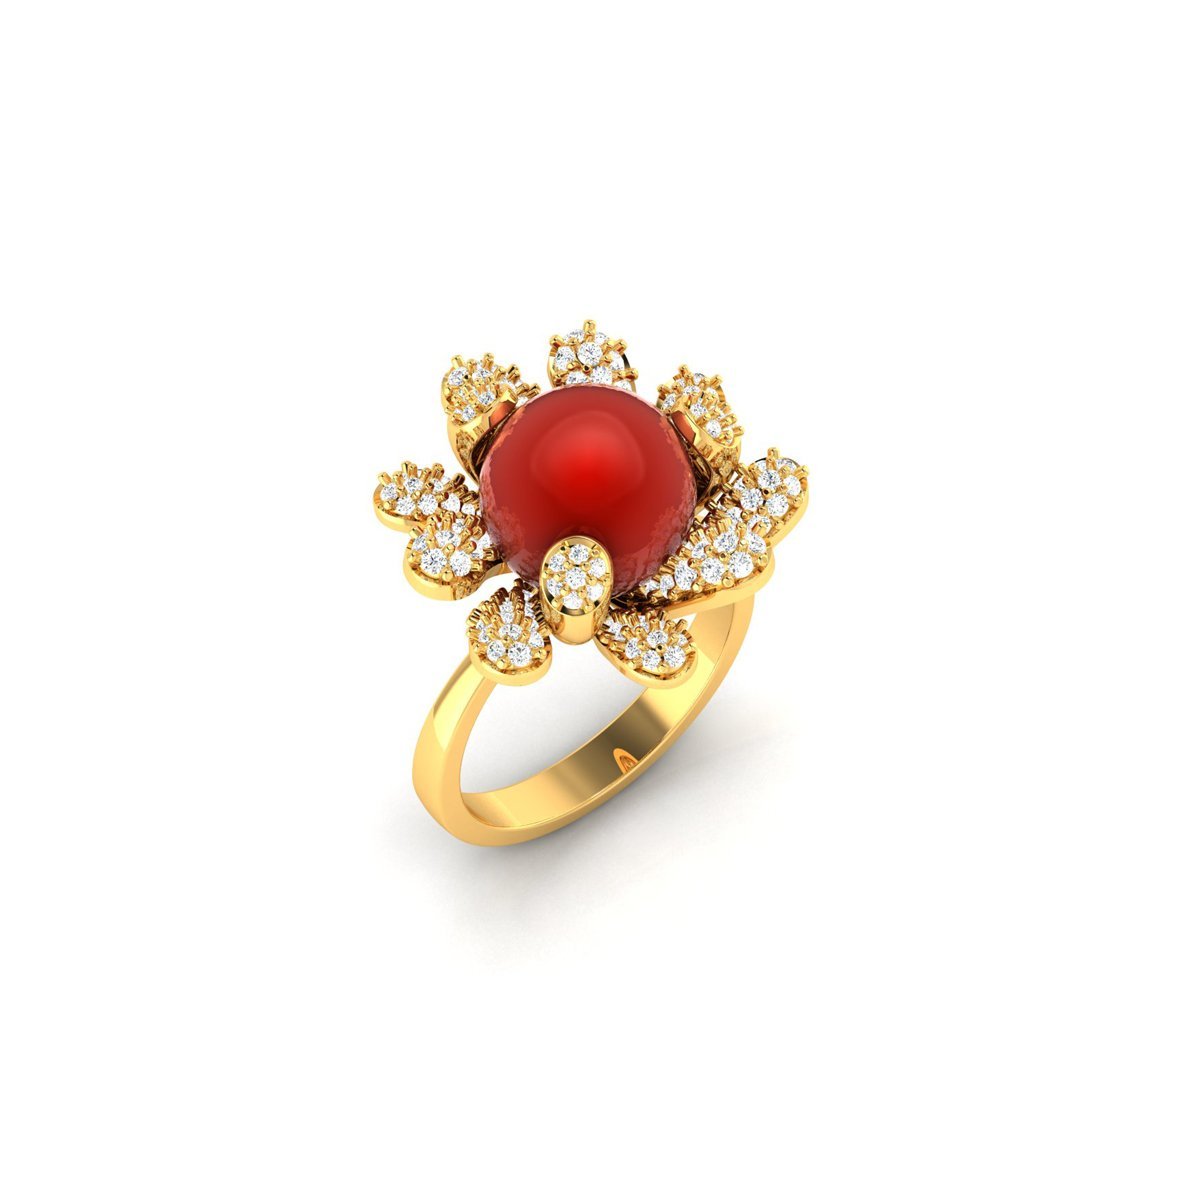 Red Spinel, Platinum and 18k Rose Gold Ring